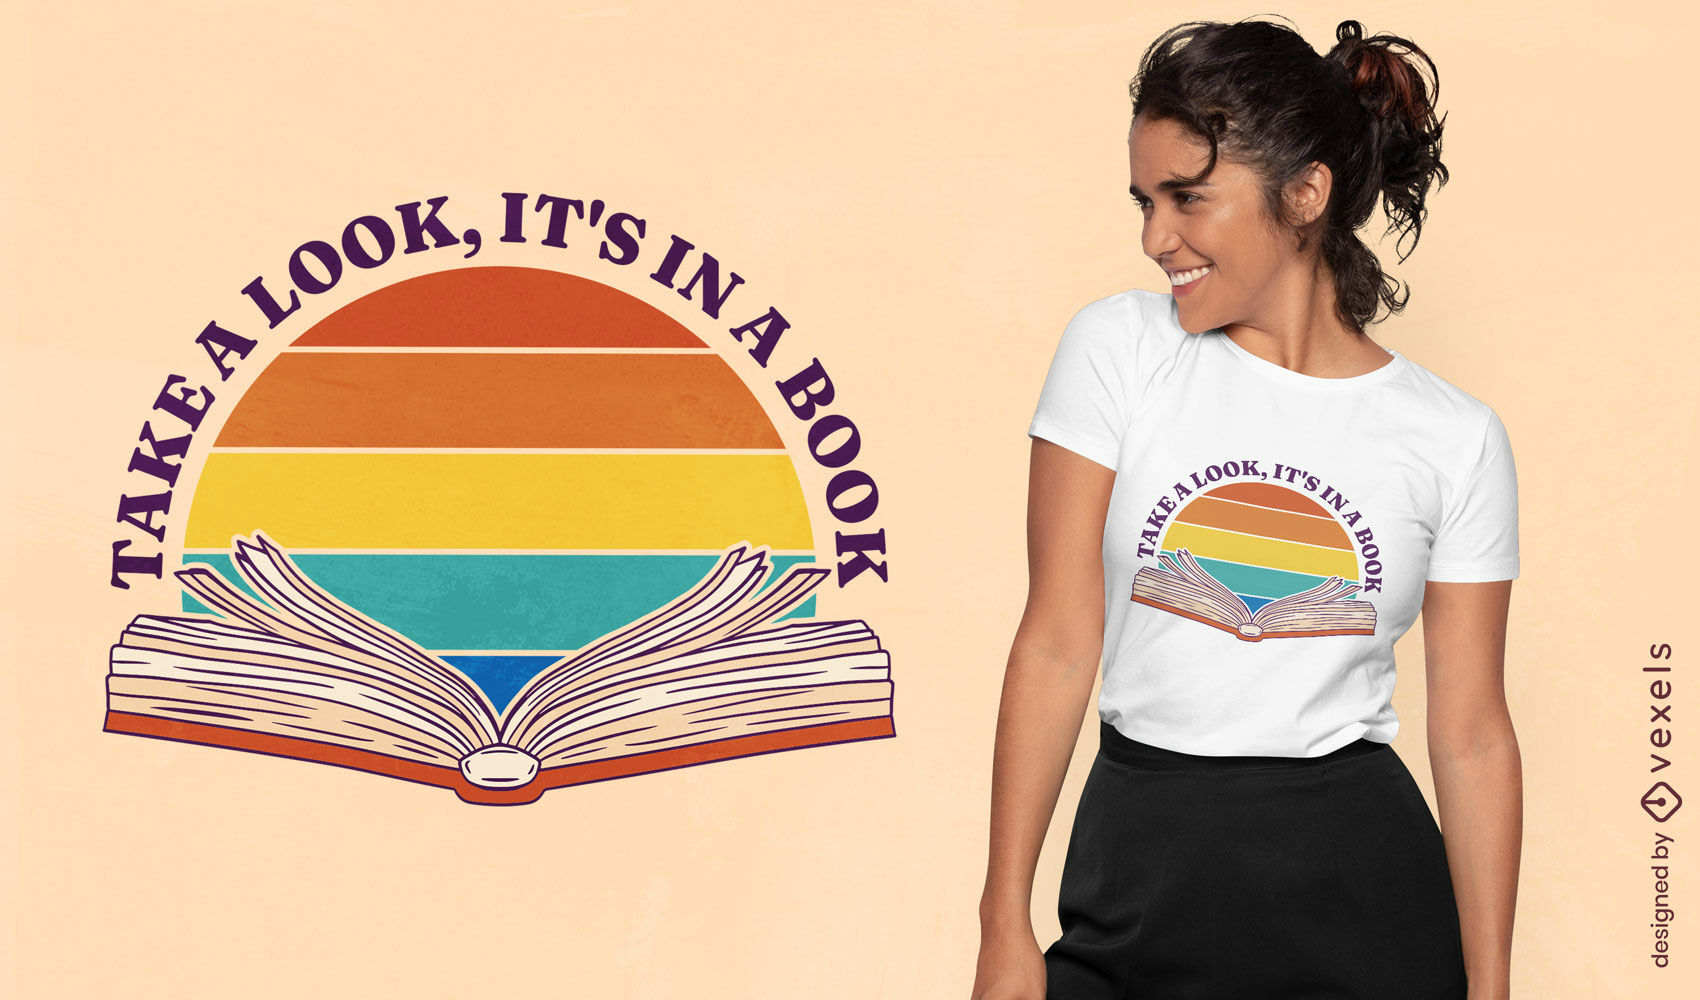 Take a look book quote t-shirt design